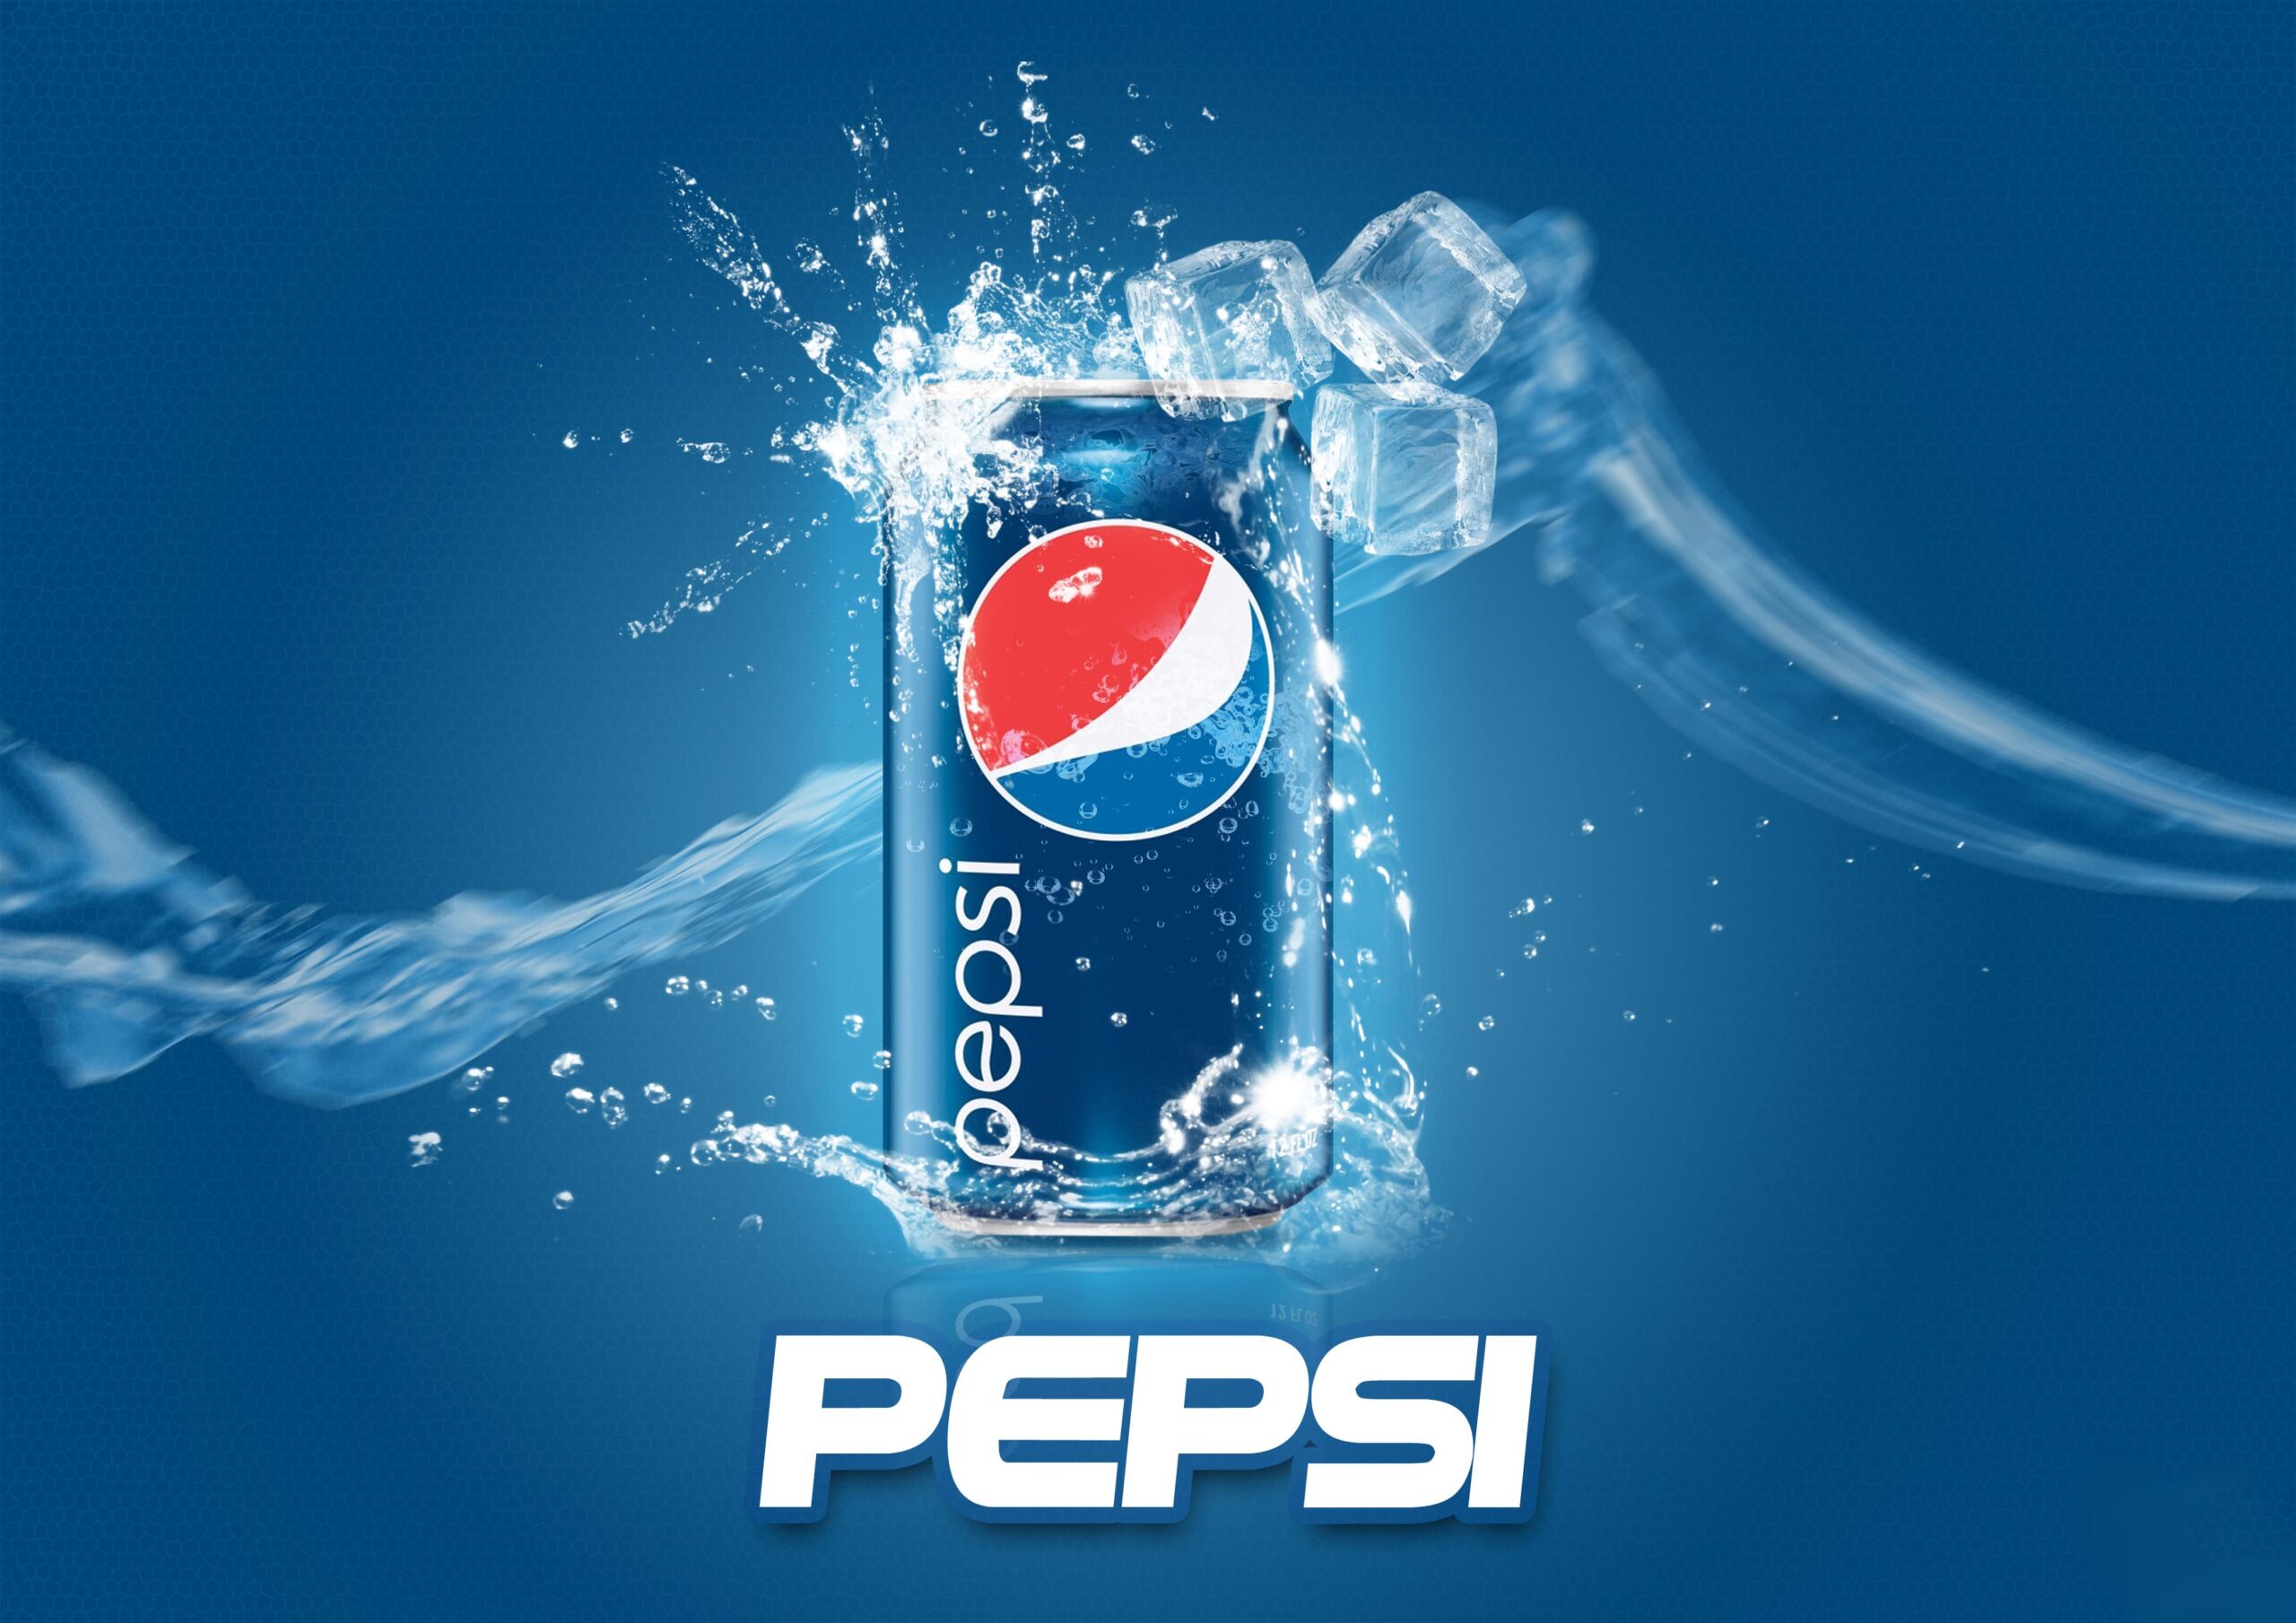 The history of Pepsi